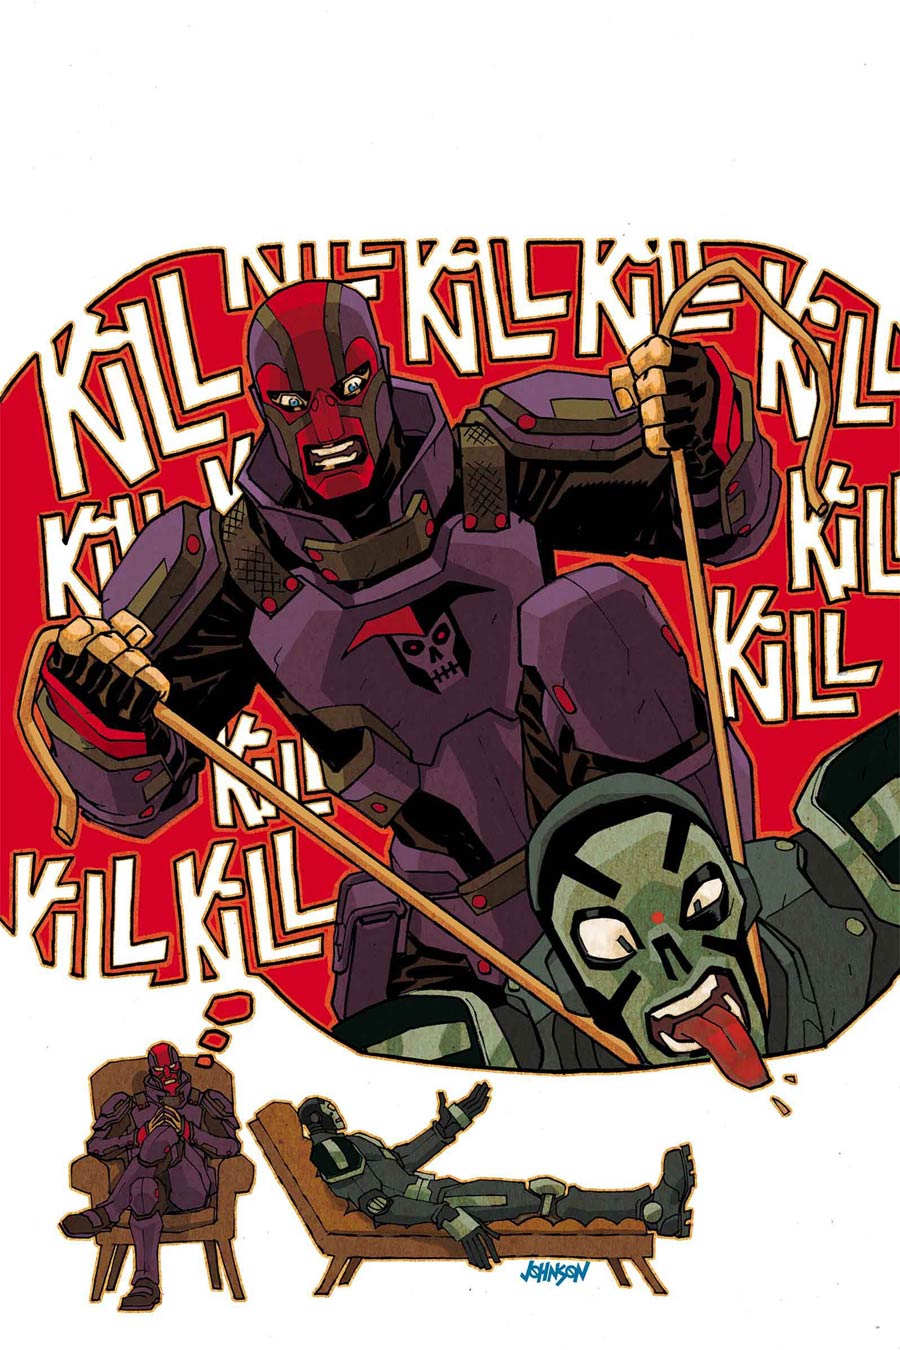 Foolkiller Vol 3 #1 By Dave Johnson Poster